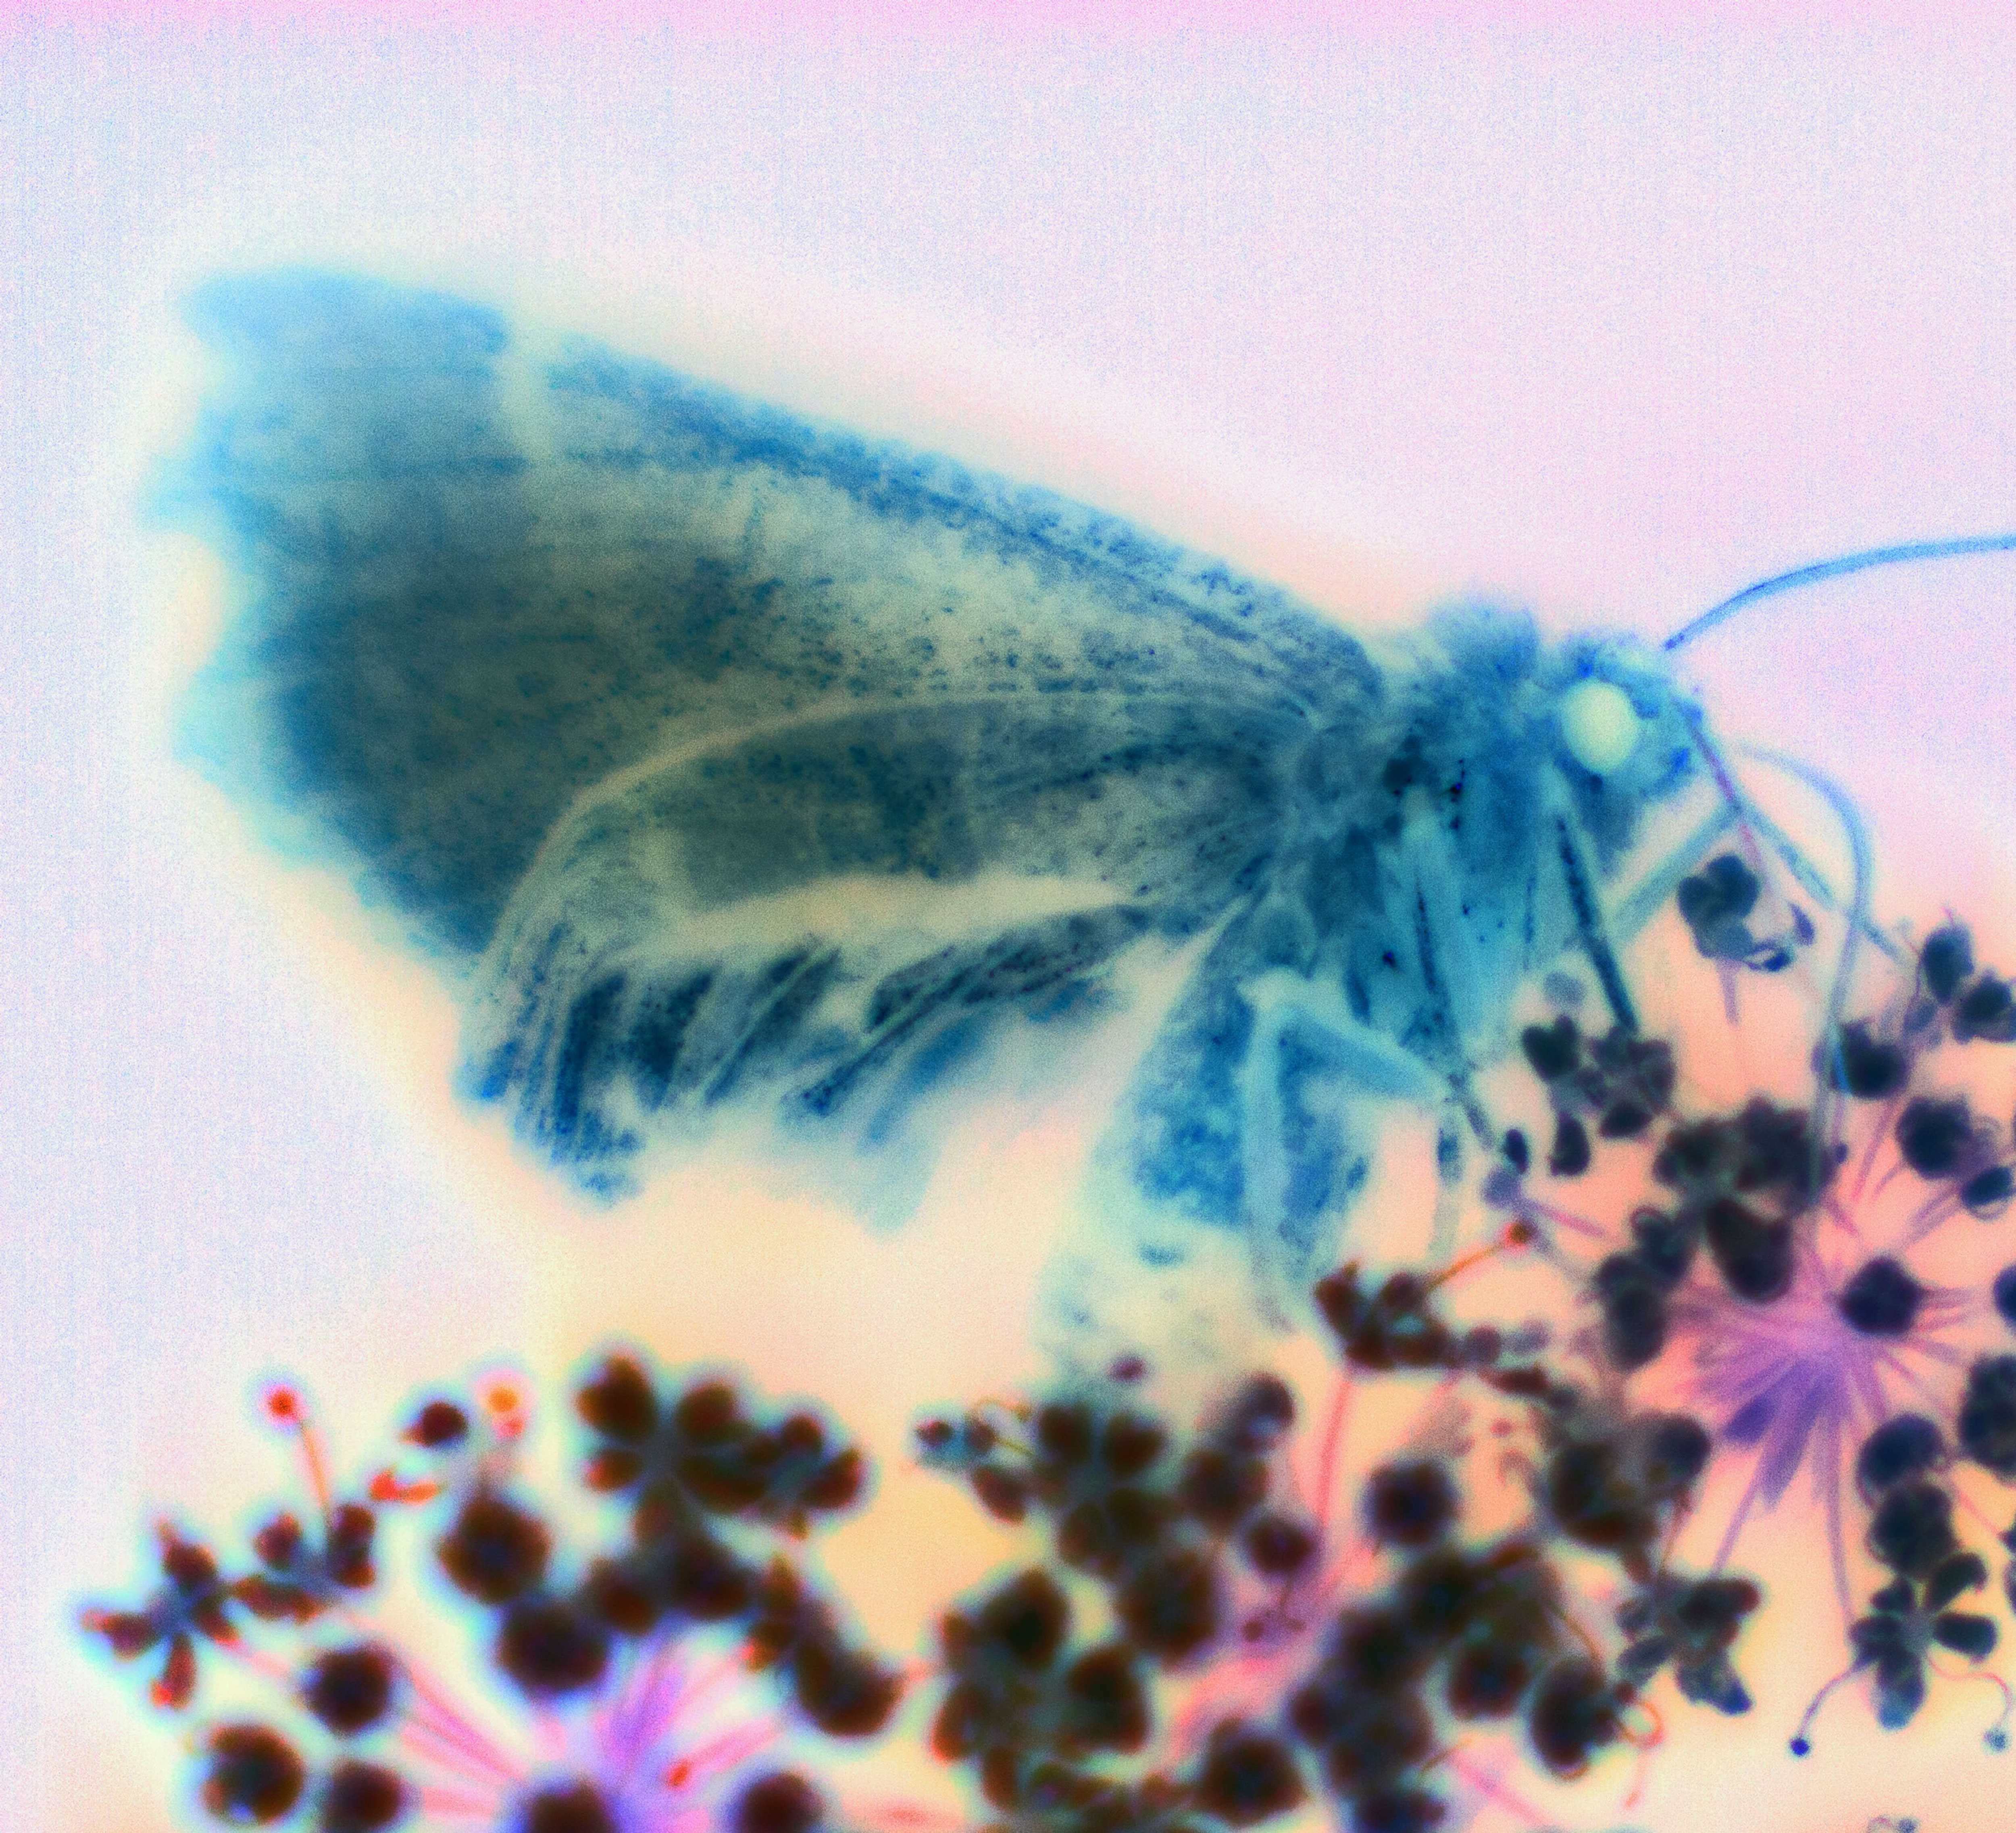 A psychedelic x-ray picture of a moth or butterfly sitting on a plant